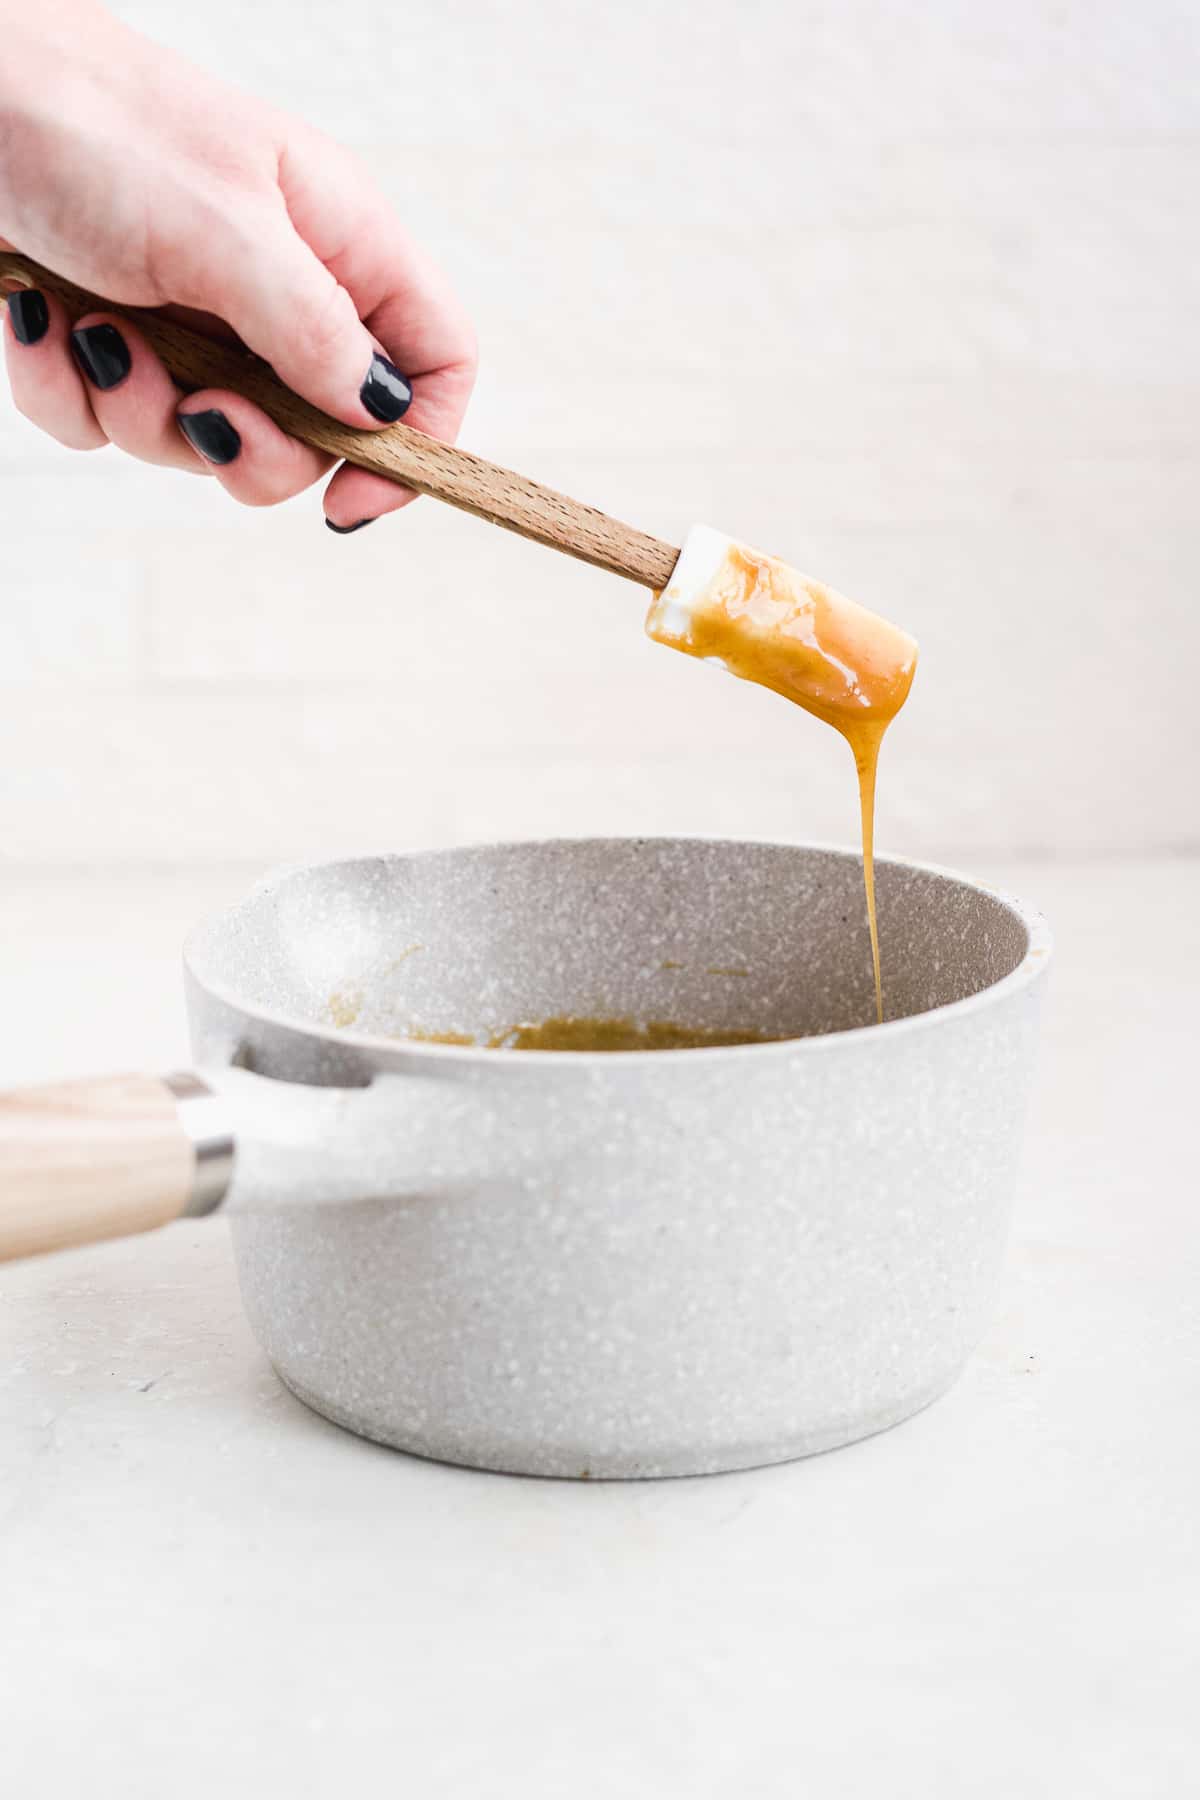 Hand showing caramel dripping off spatula over a white pot.